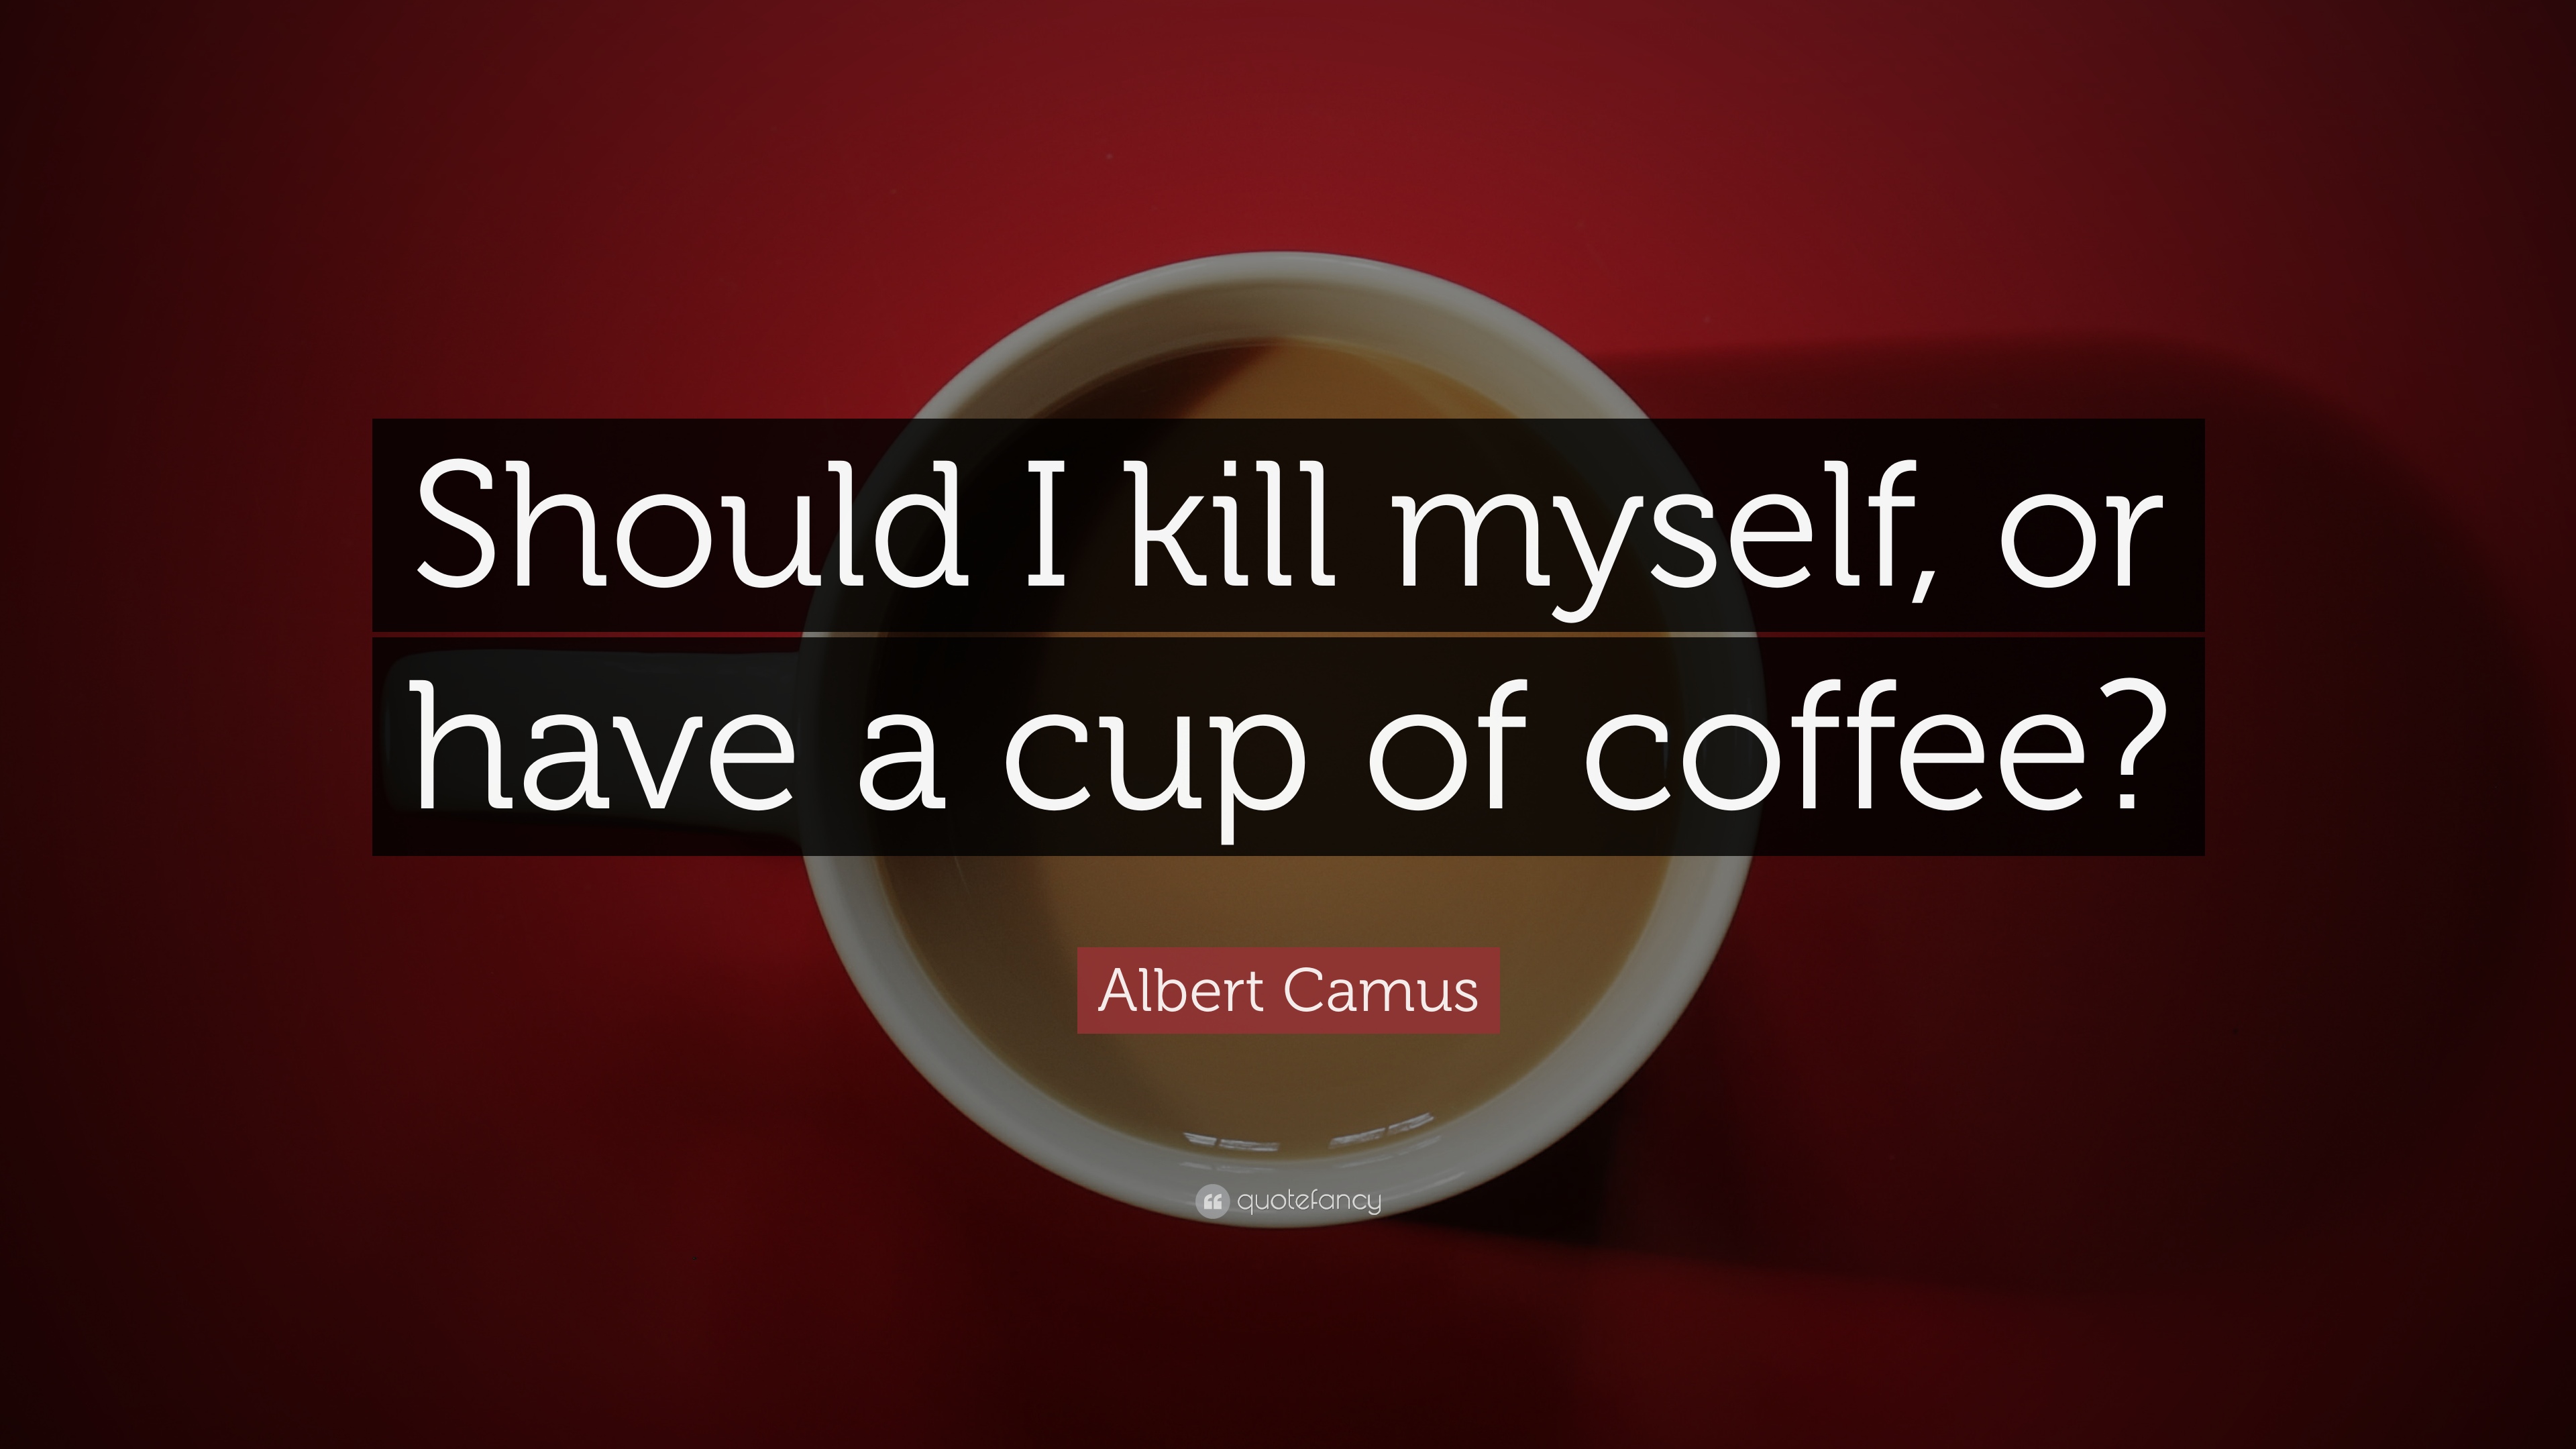 Albert Camus Quote - Cup Of Coffee Or Kill Yourself , HD Wallpaper & Backgrounds